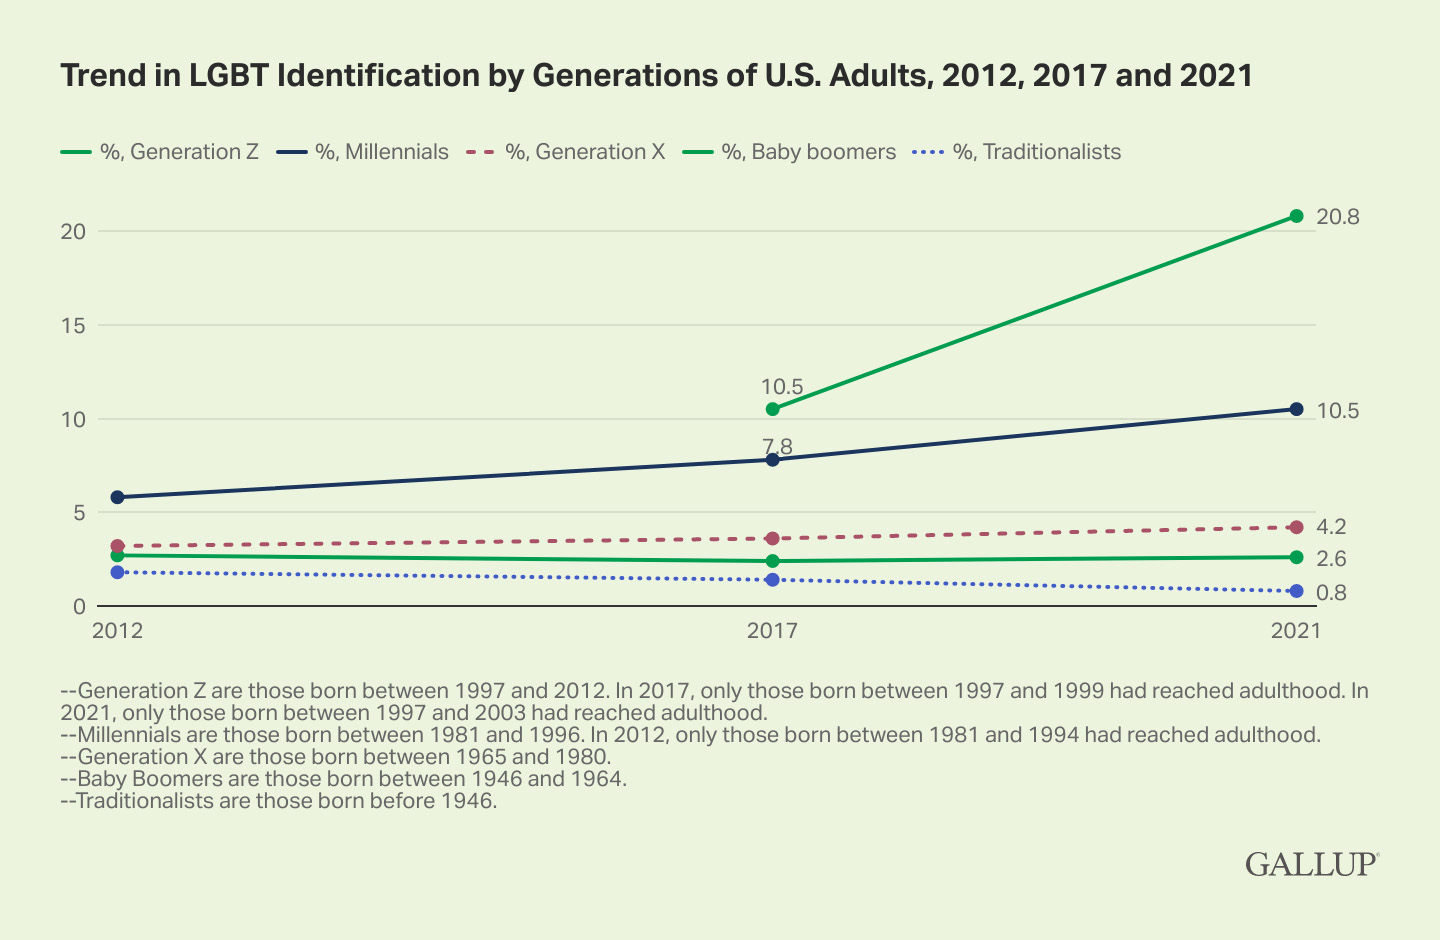 "Trend in LGBT Identification by Generations of U.S. Adults, 2012, 2017 and 2021" Graphic courtesy of Gallup